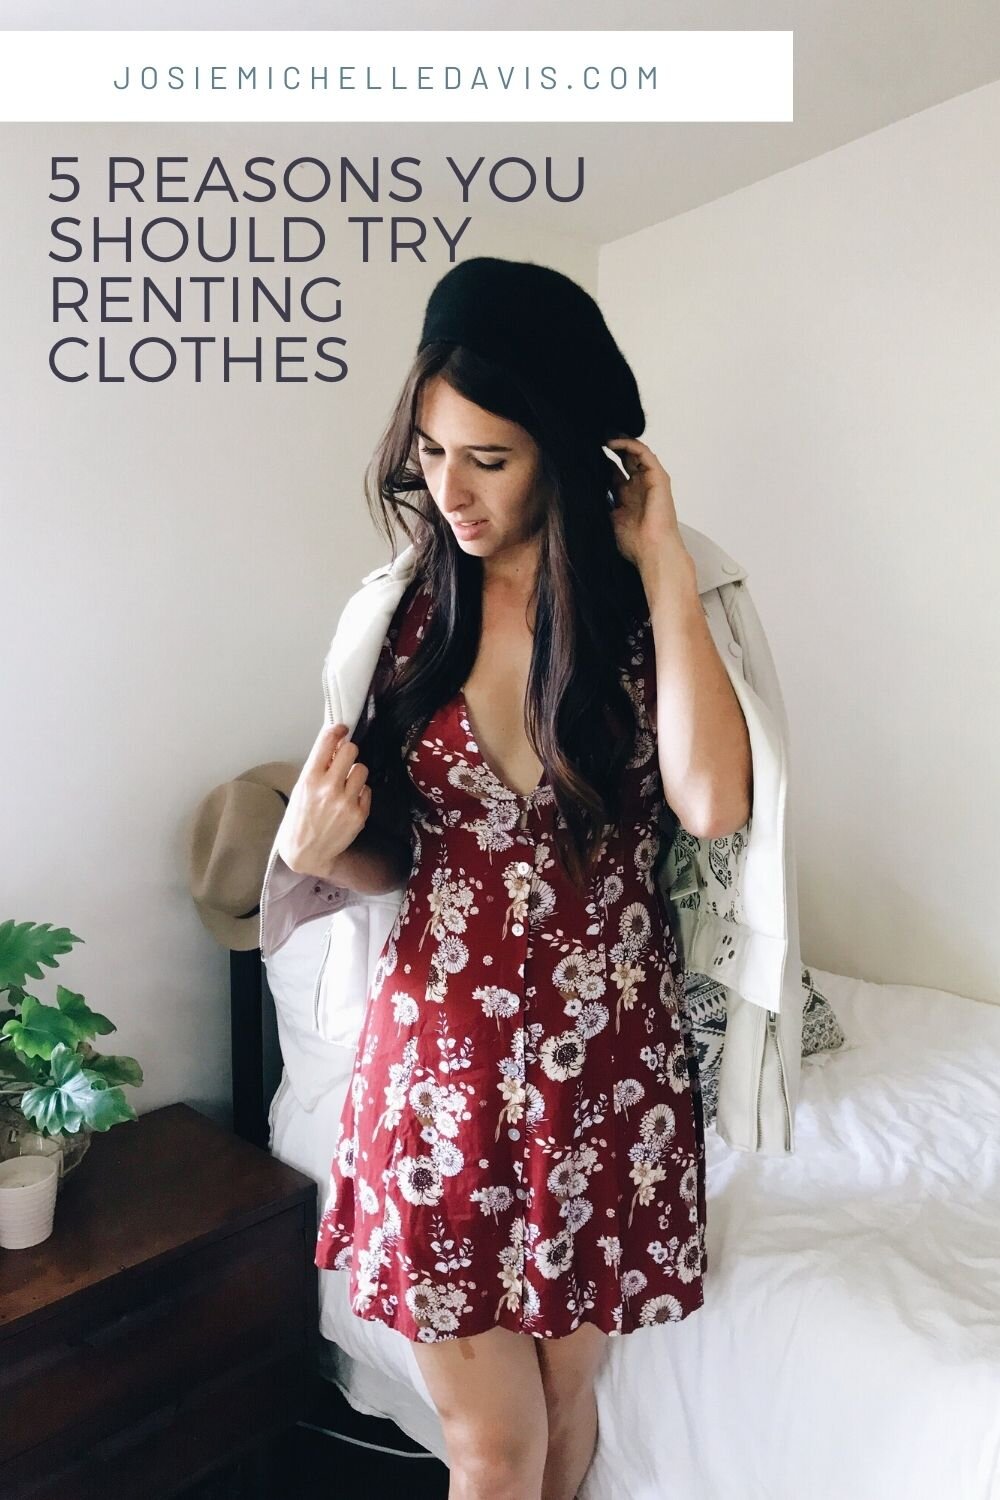 5 Reasons Why You Should Try Renting Clothes